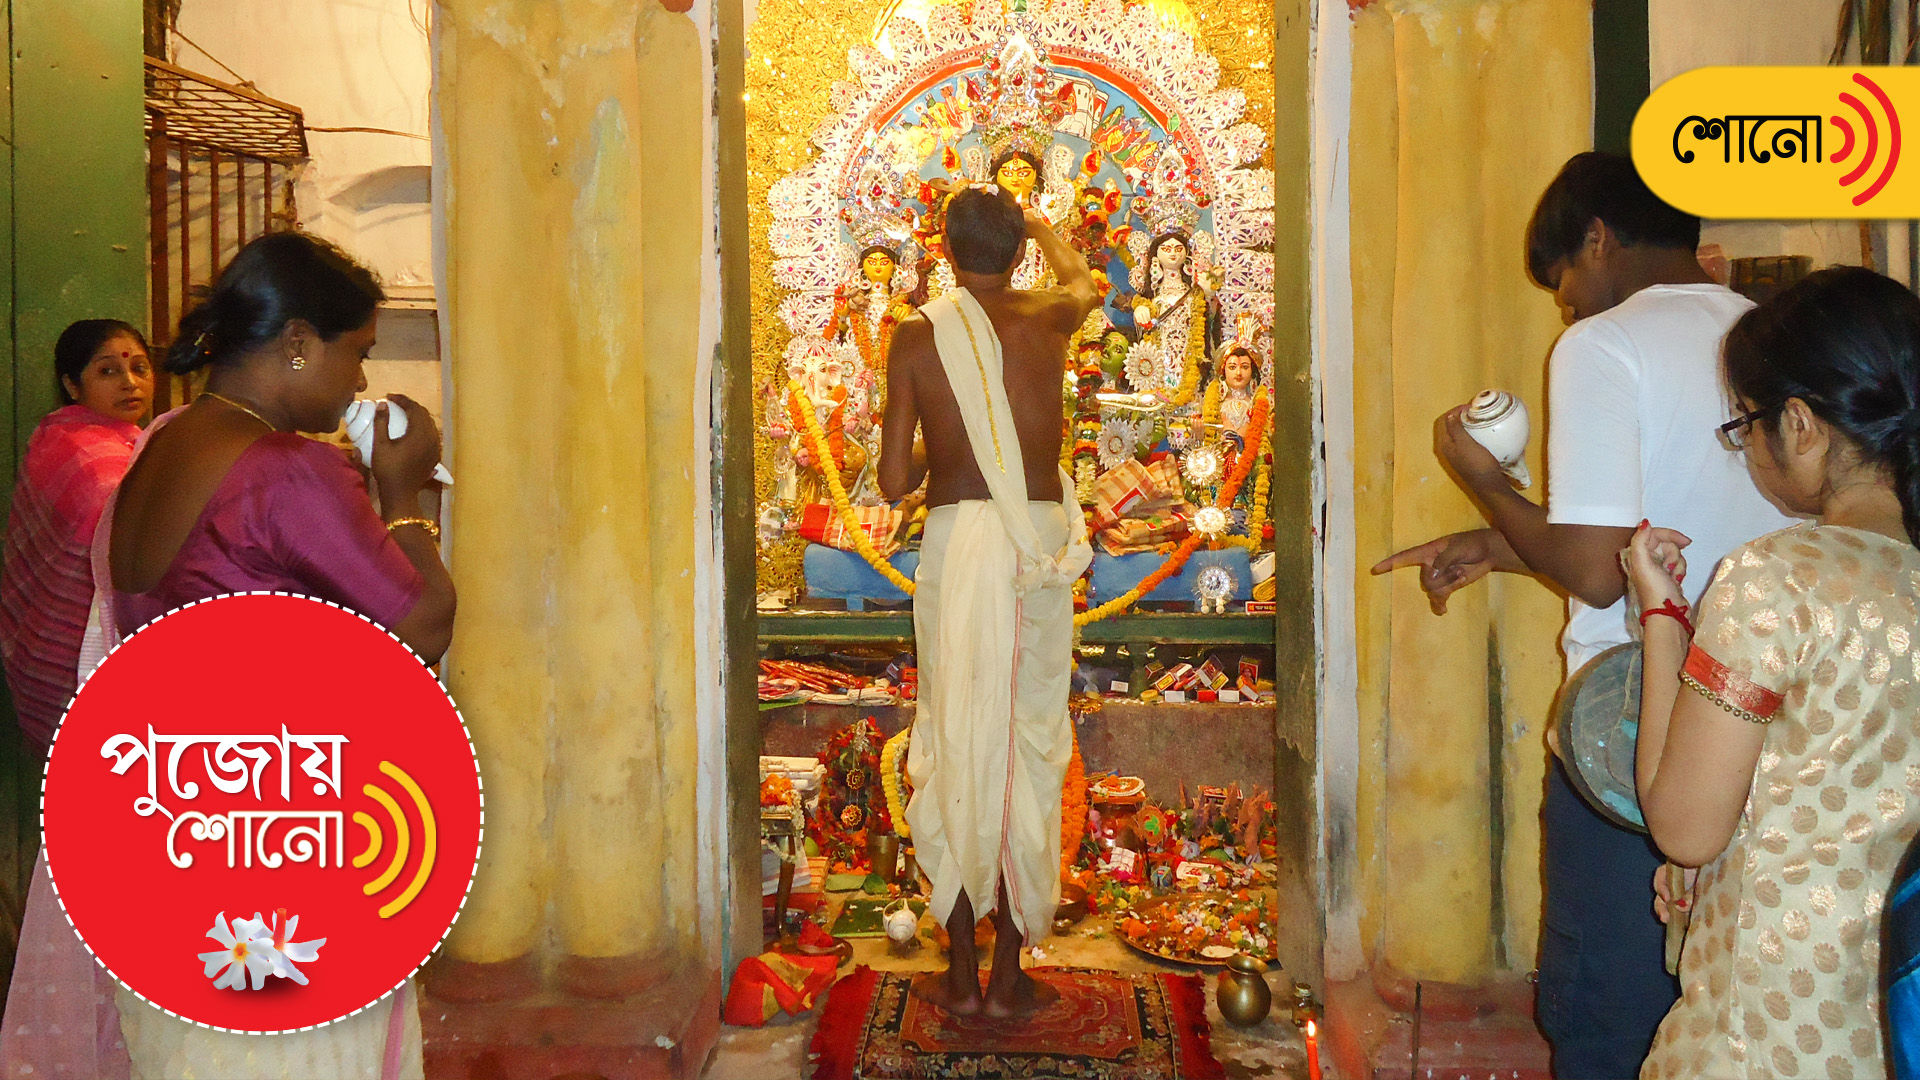 Know more about the Durga Puja in Biswanath Matilal house in Kolkata